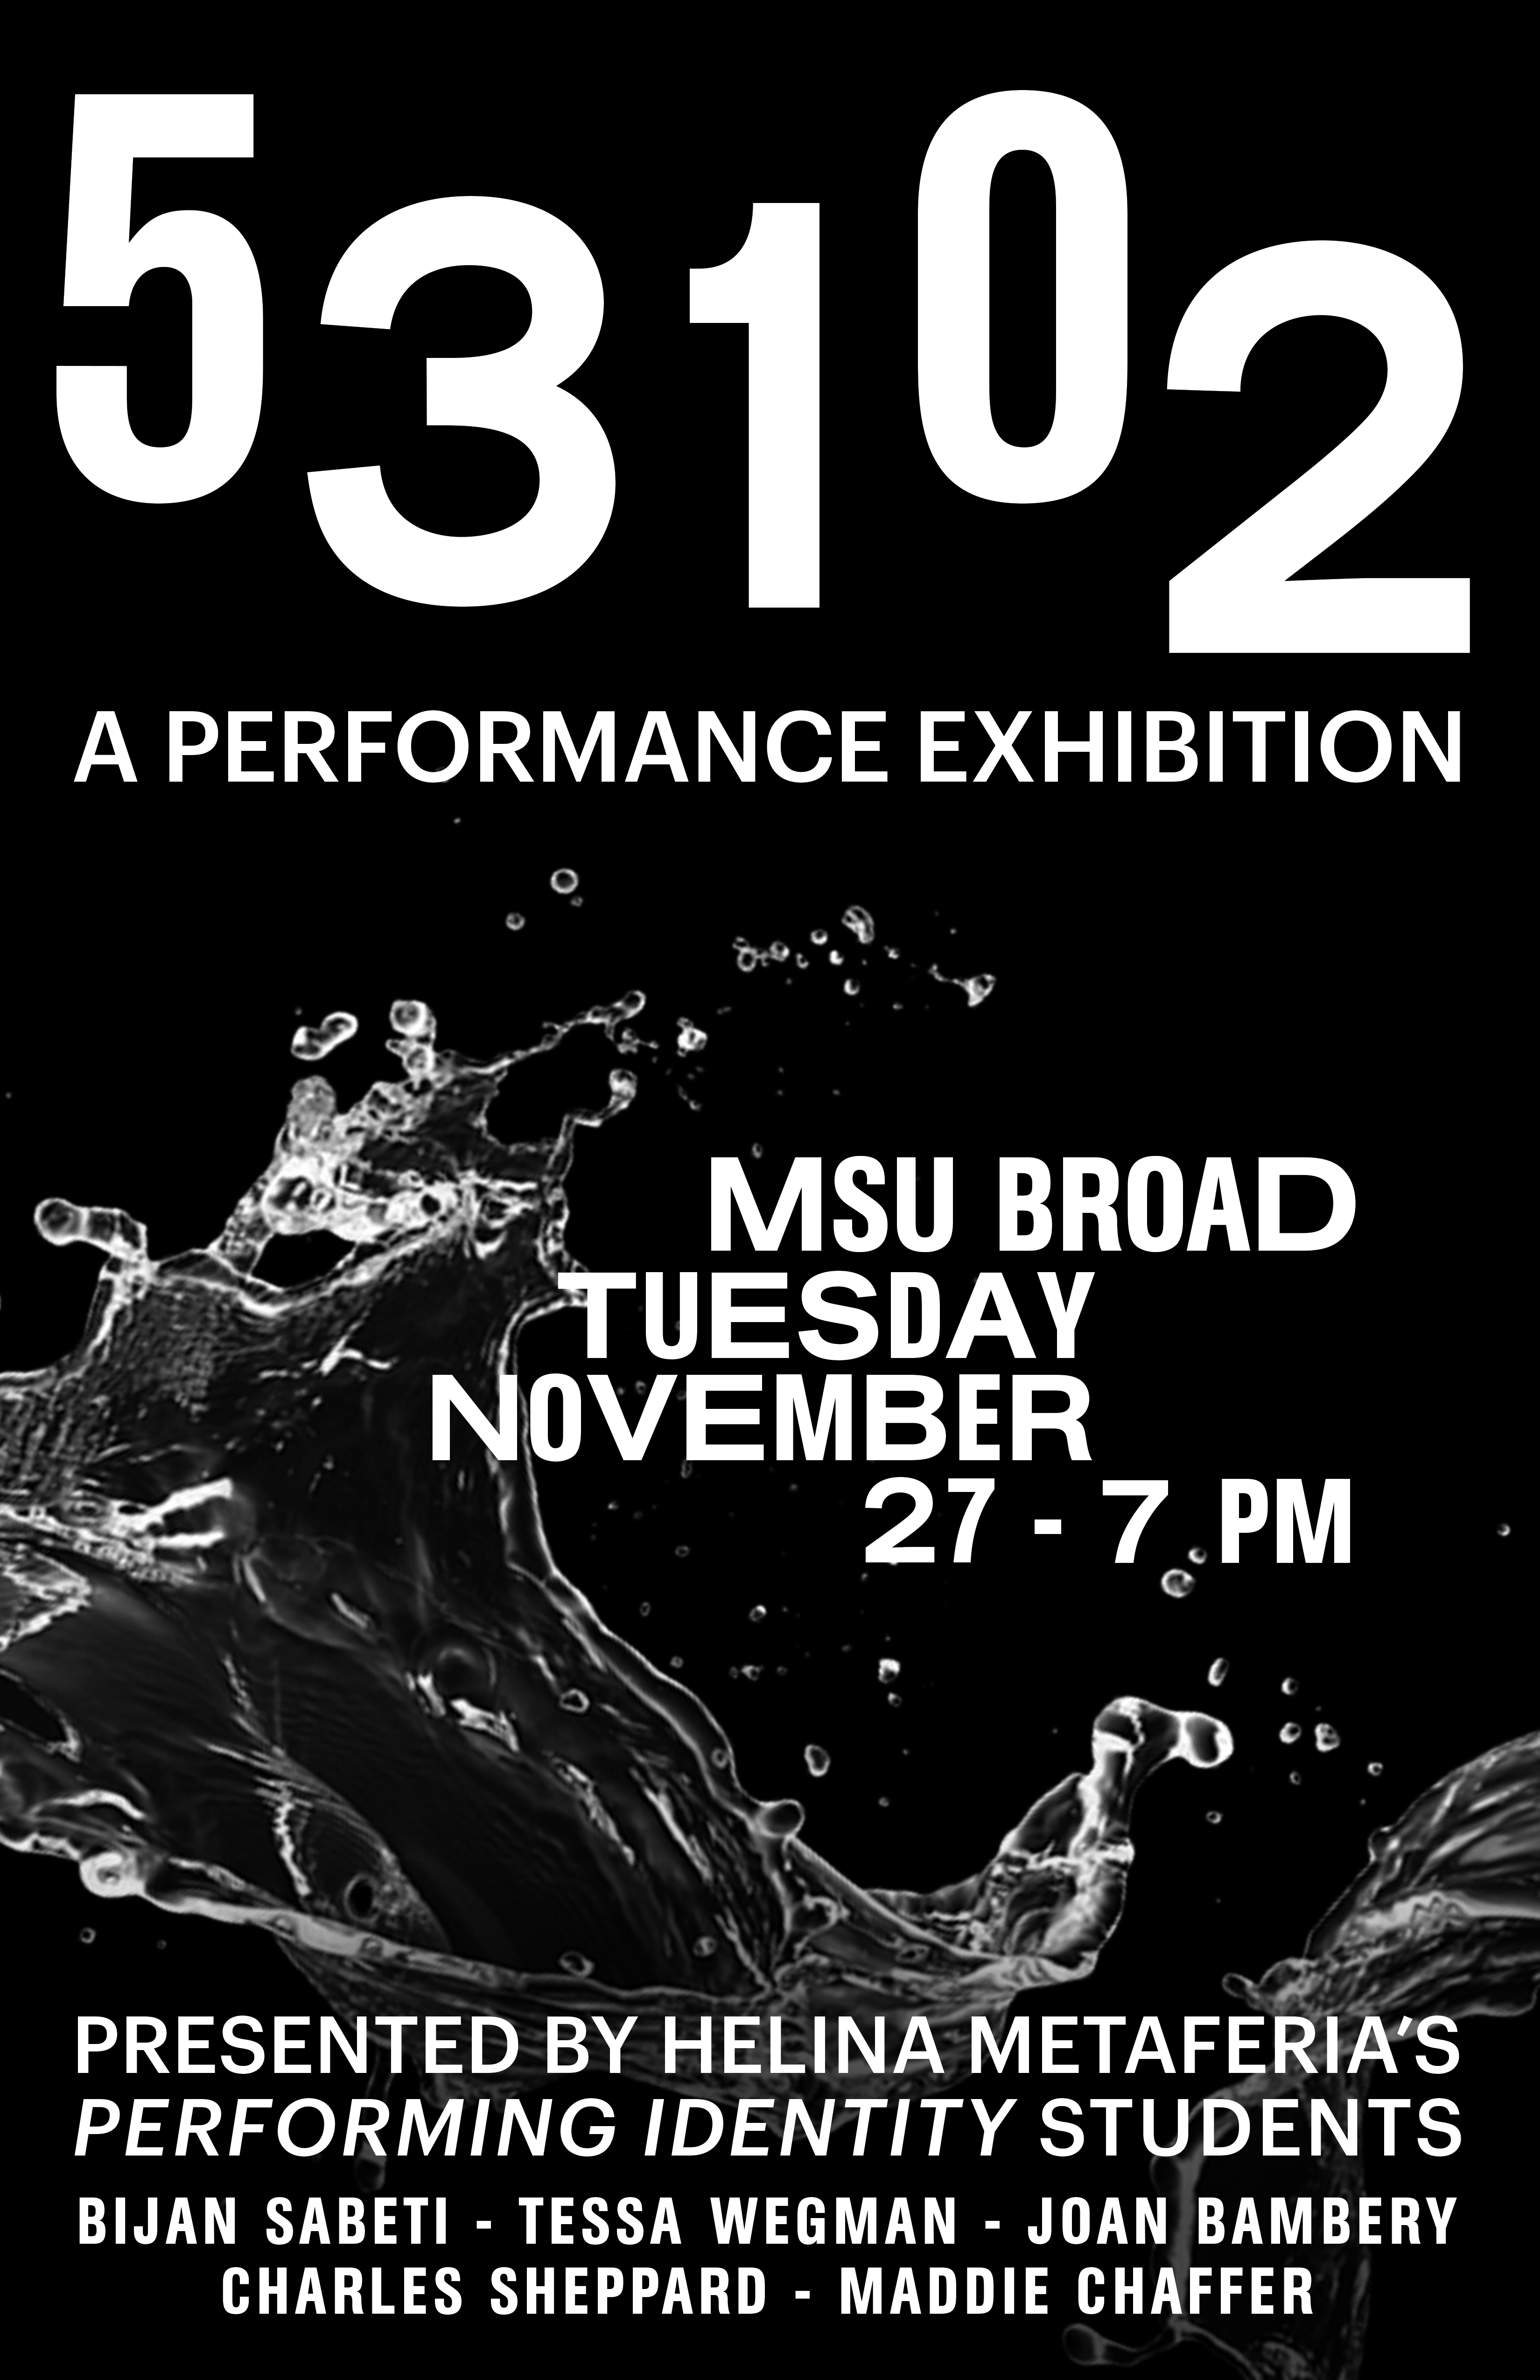 53102: A Performance Exhibition